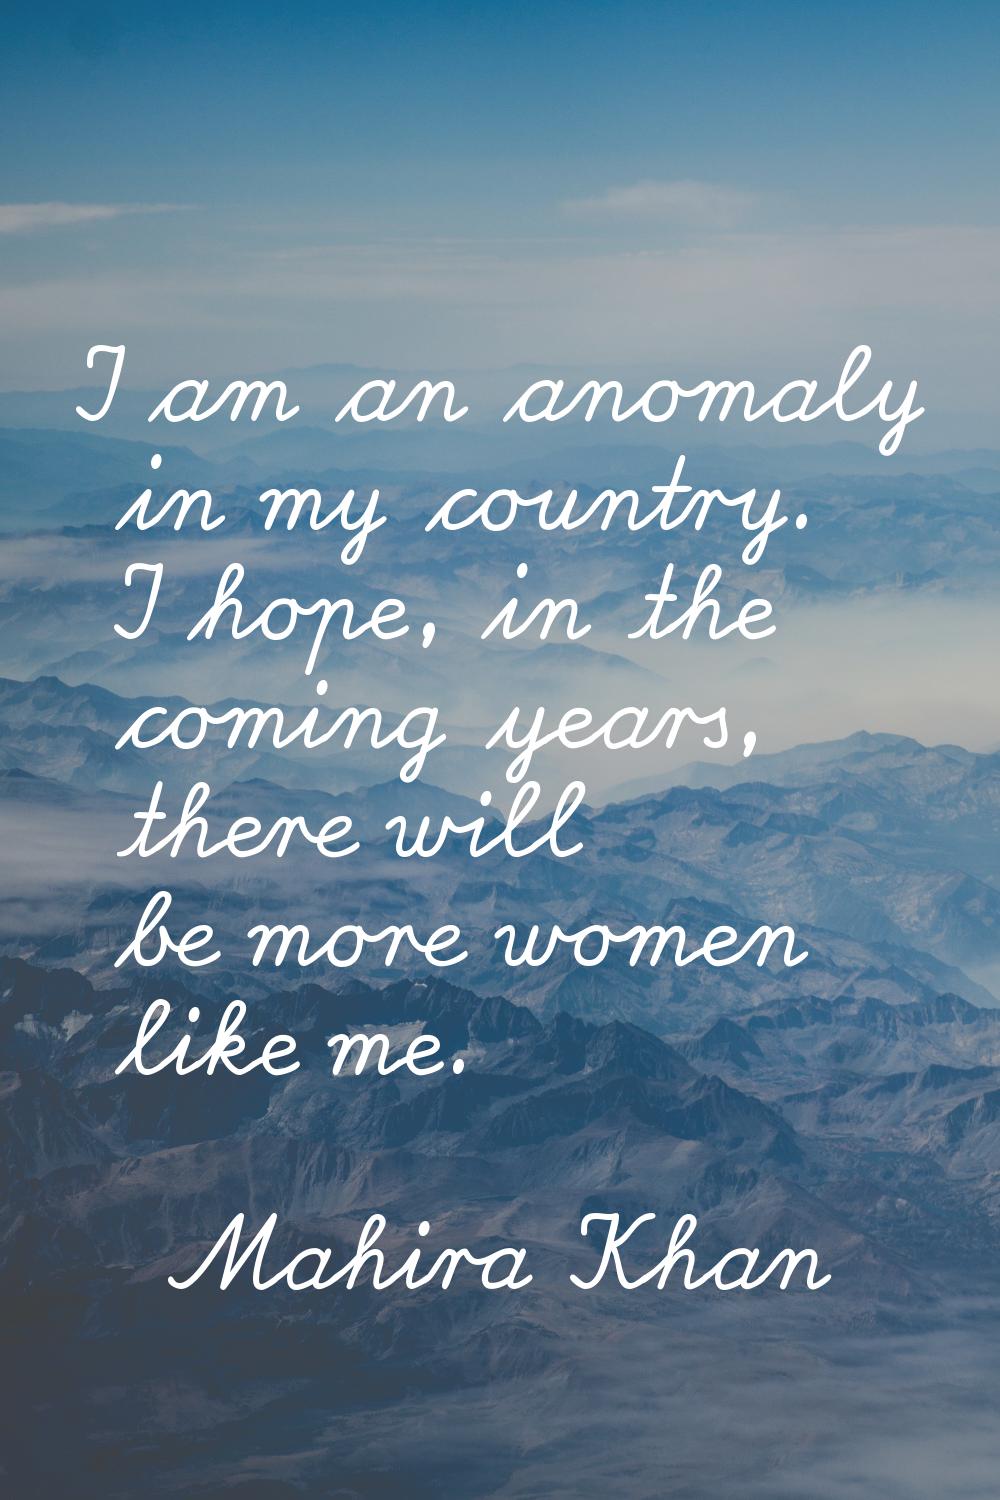 I am an anomaly in my country. I hope, in the coming years, there will be more women like me.